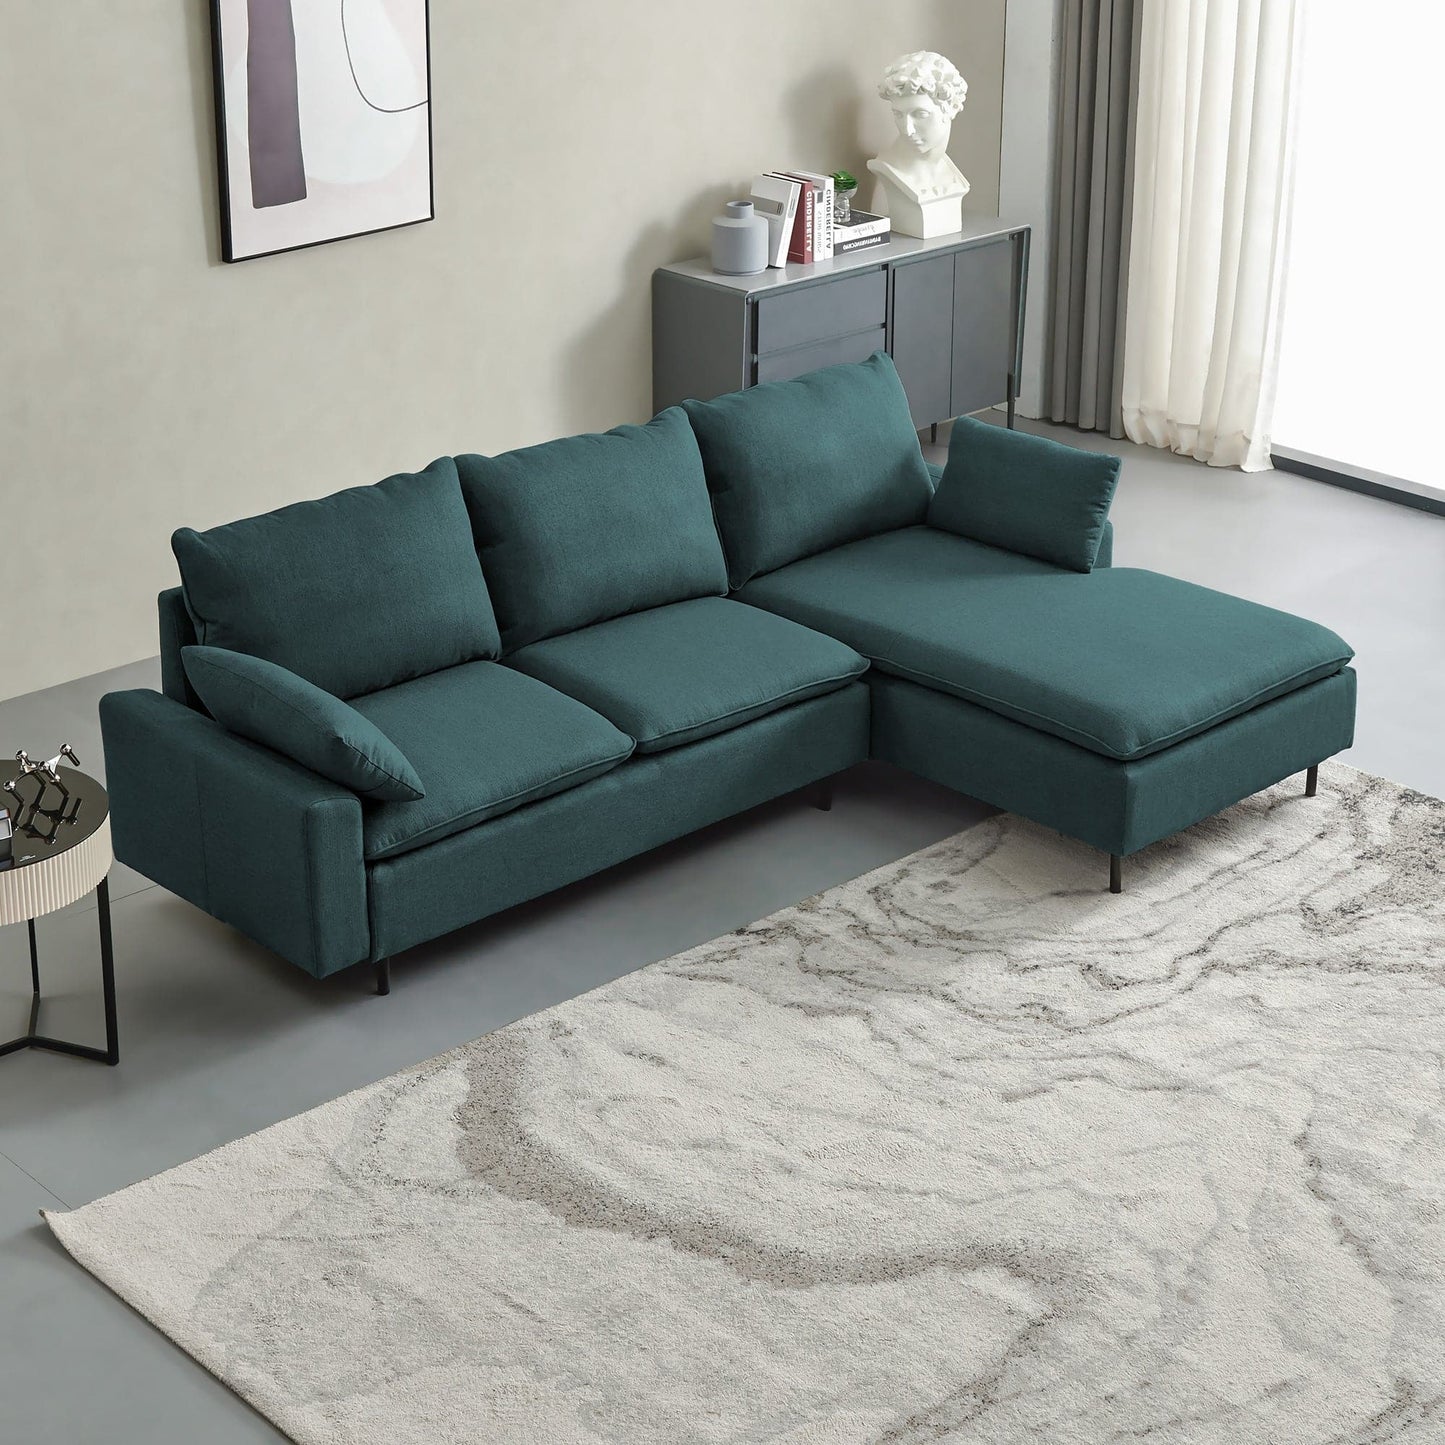 TFC&H Co. L-Shaped Linen Sectional Sofa w/ Left Chaise - Muted Green- Ships from The US - sectional at TFC&H Co.